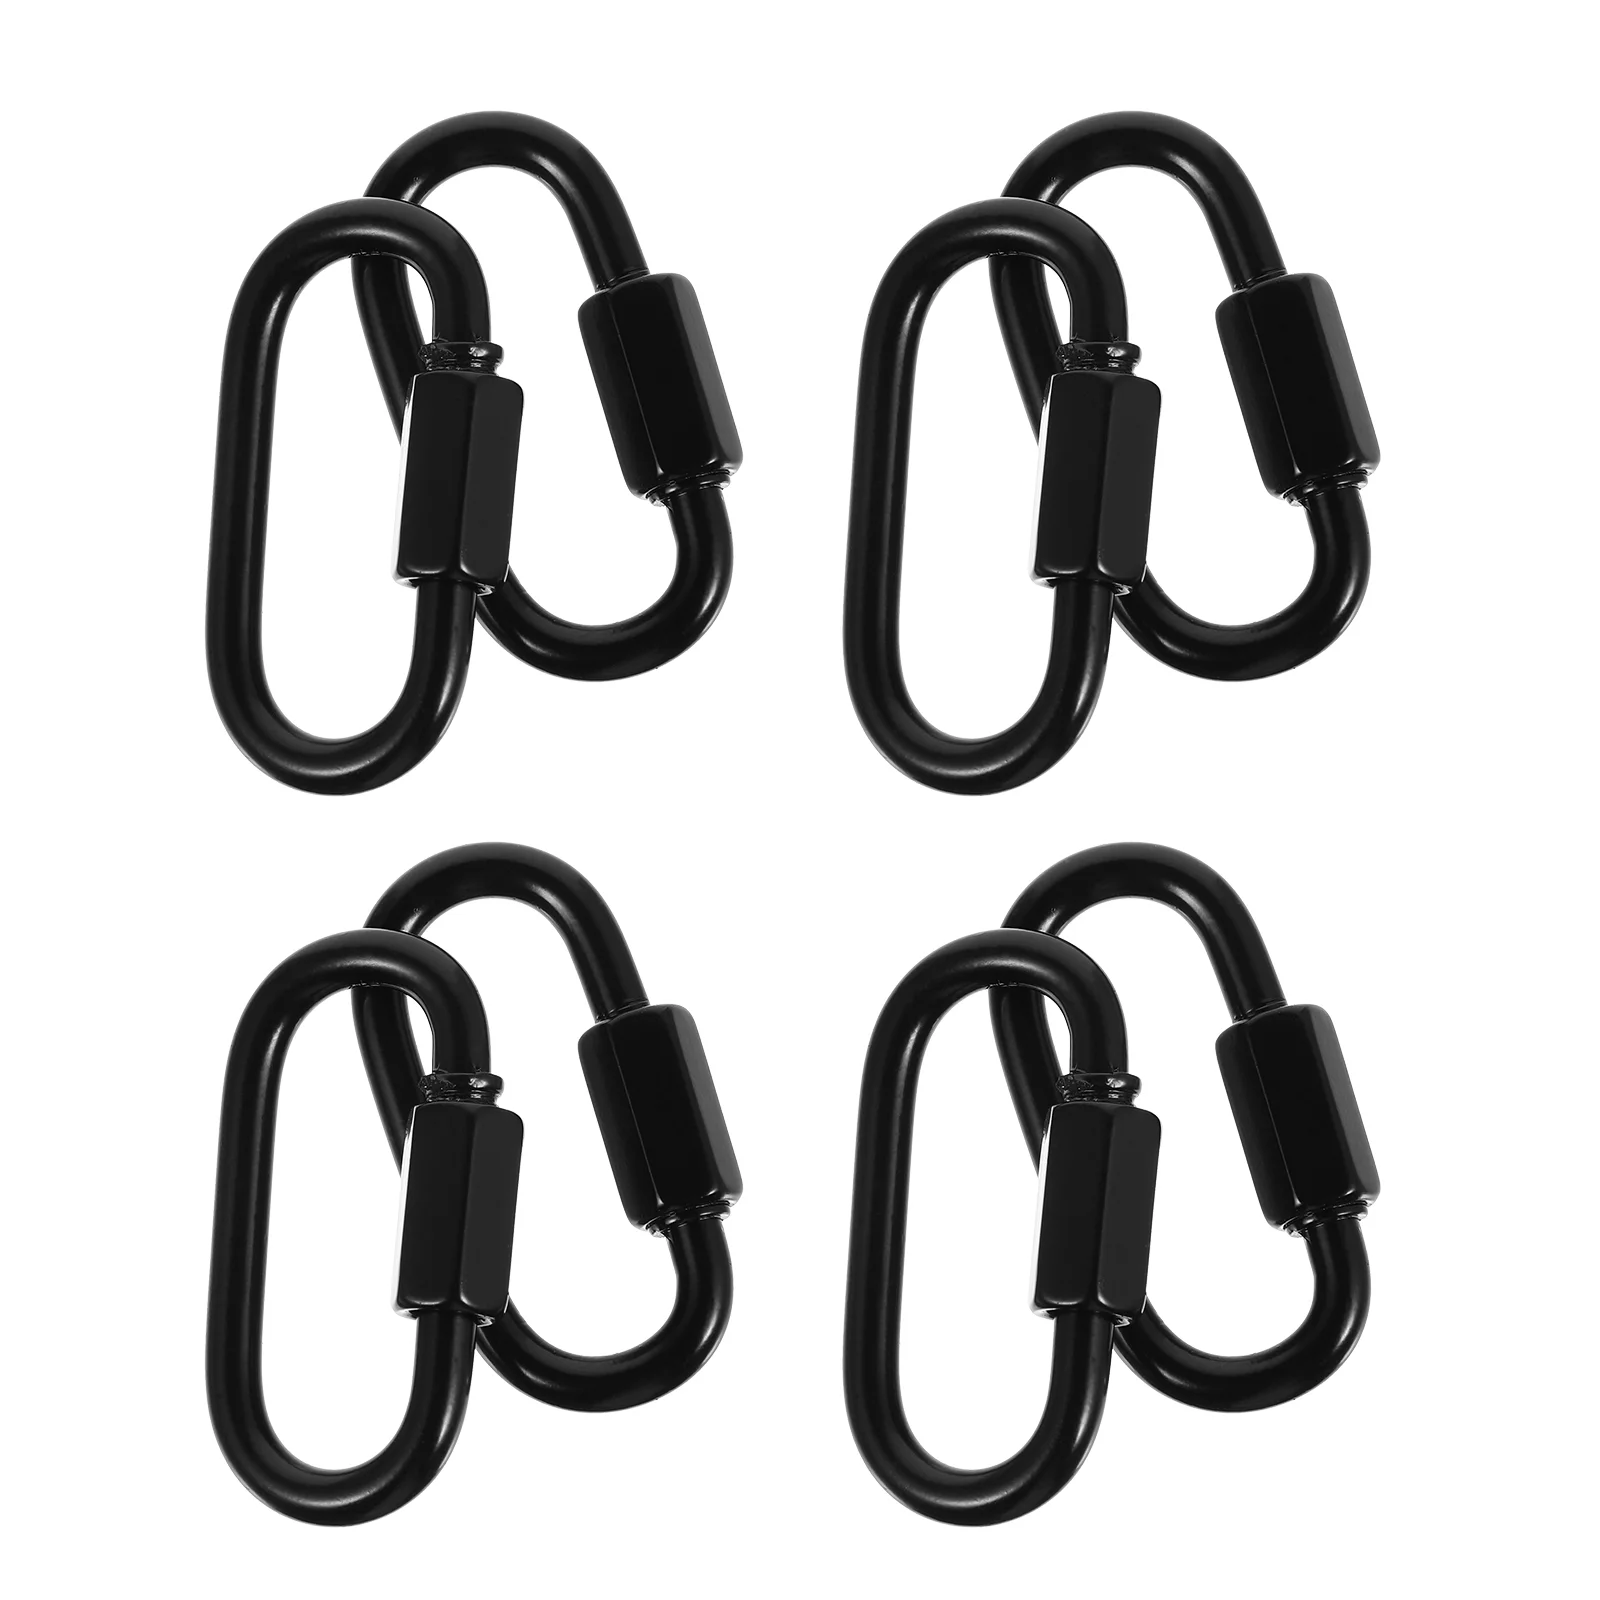 8 Pcs Carabiner Lifting Hooks Rope Quick Link Connector Chain Links Spring Trailer Connectors Safety Locking Iron self locking big hook multifunctional carabiners snap chain links rope quick connectors portable climbing buckle alloy steel